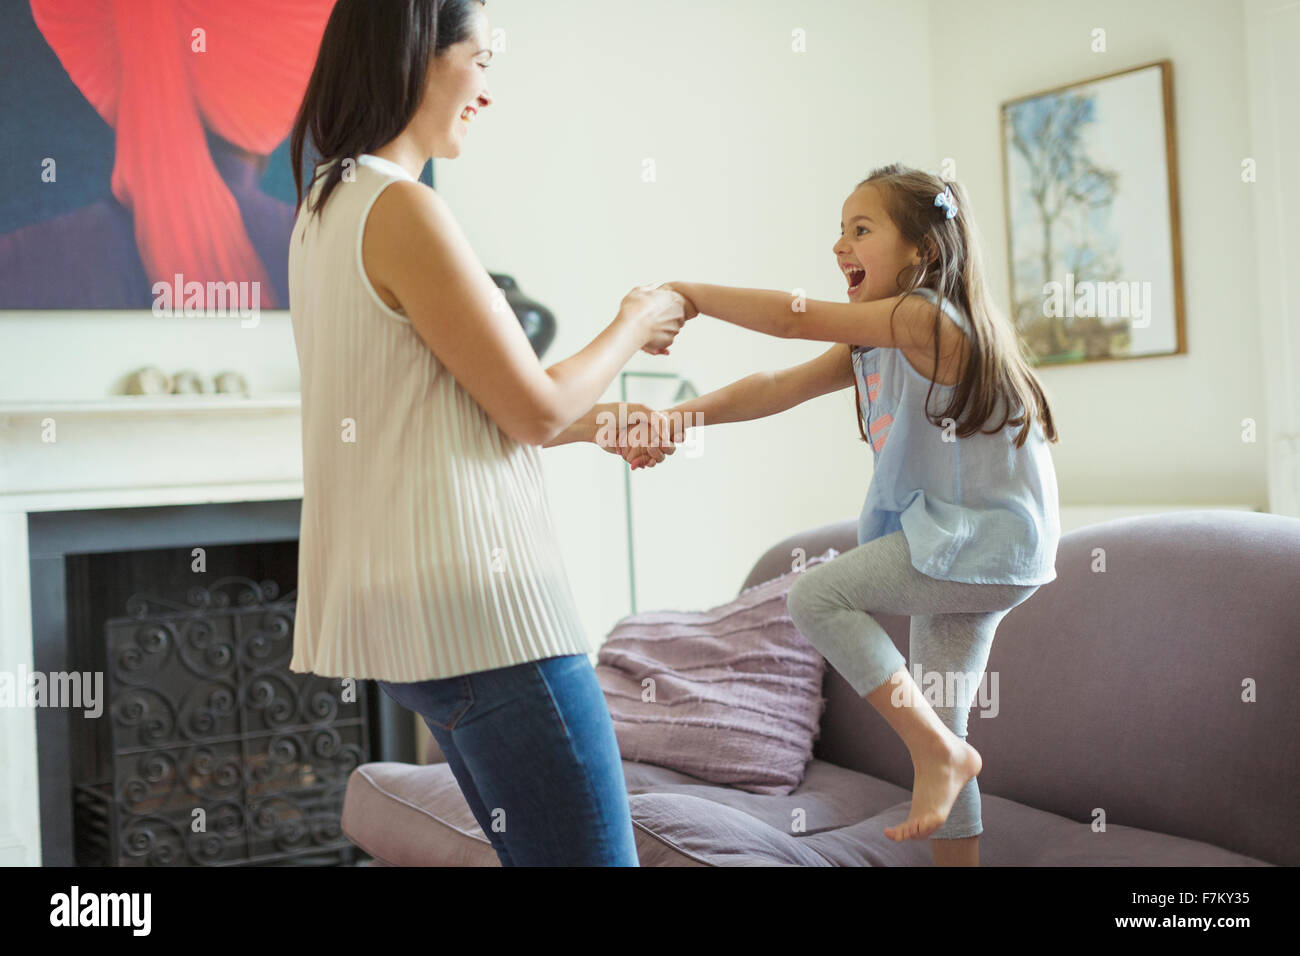 Playful mother and daughter dancing in living room Stock Photo